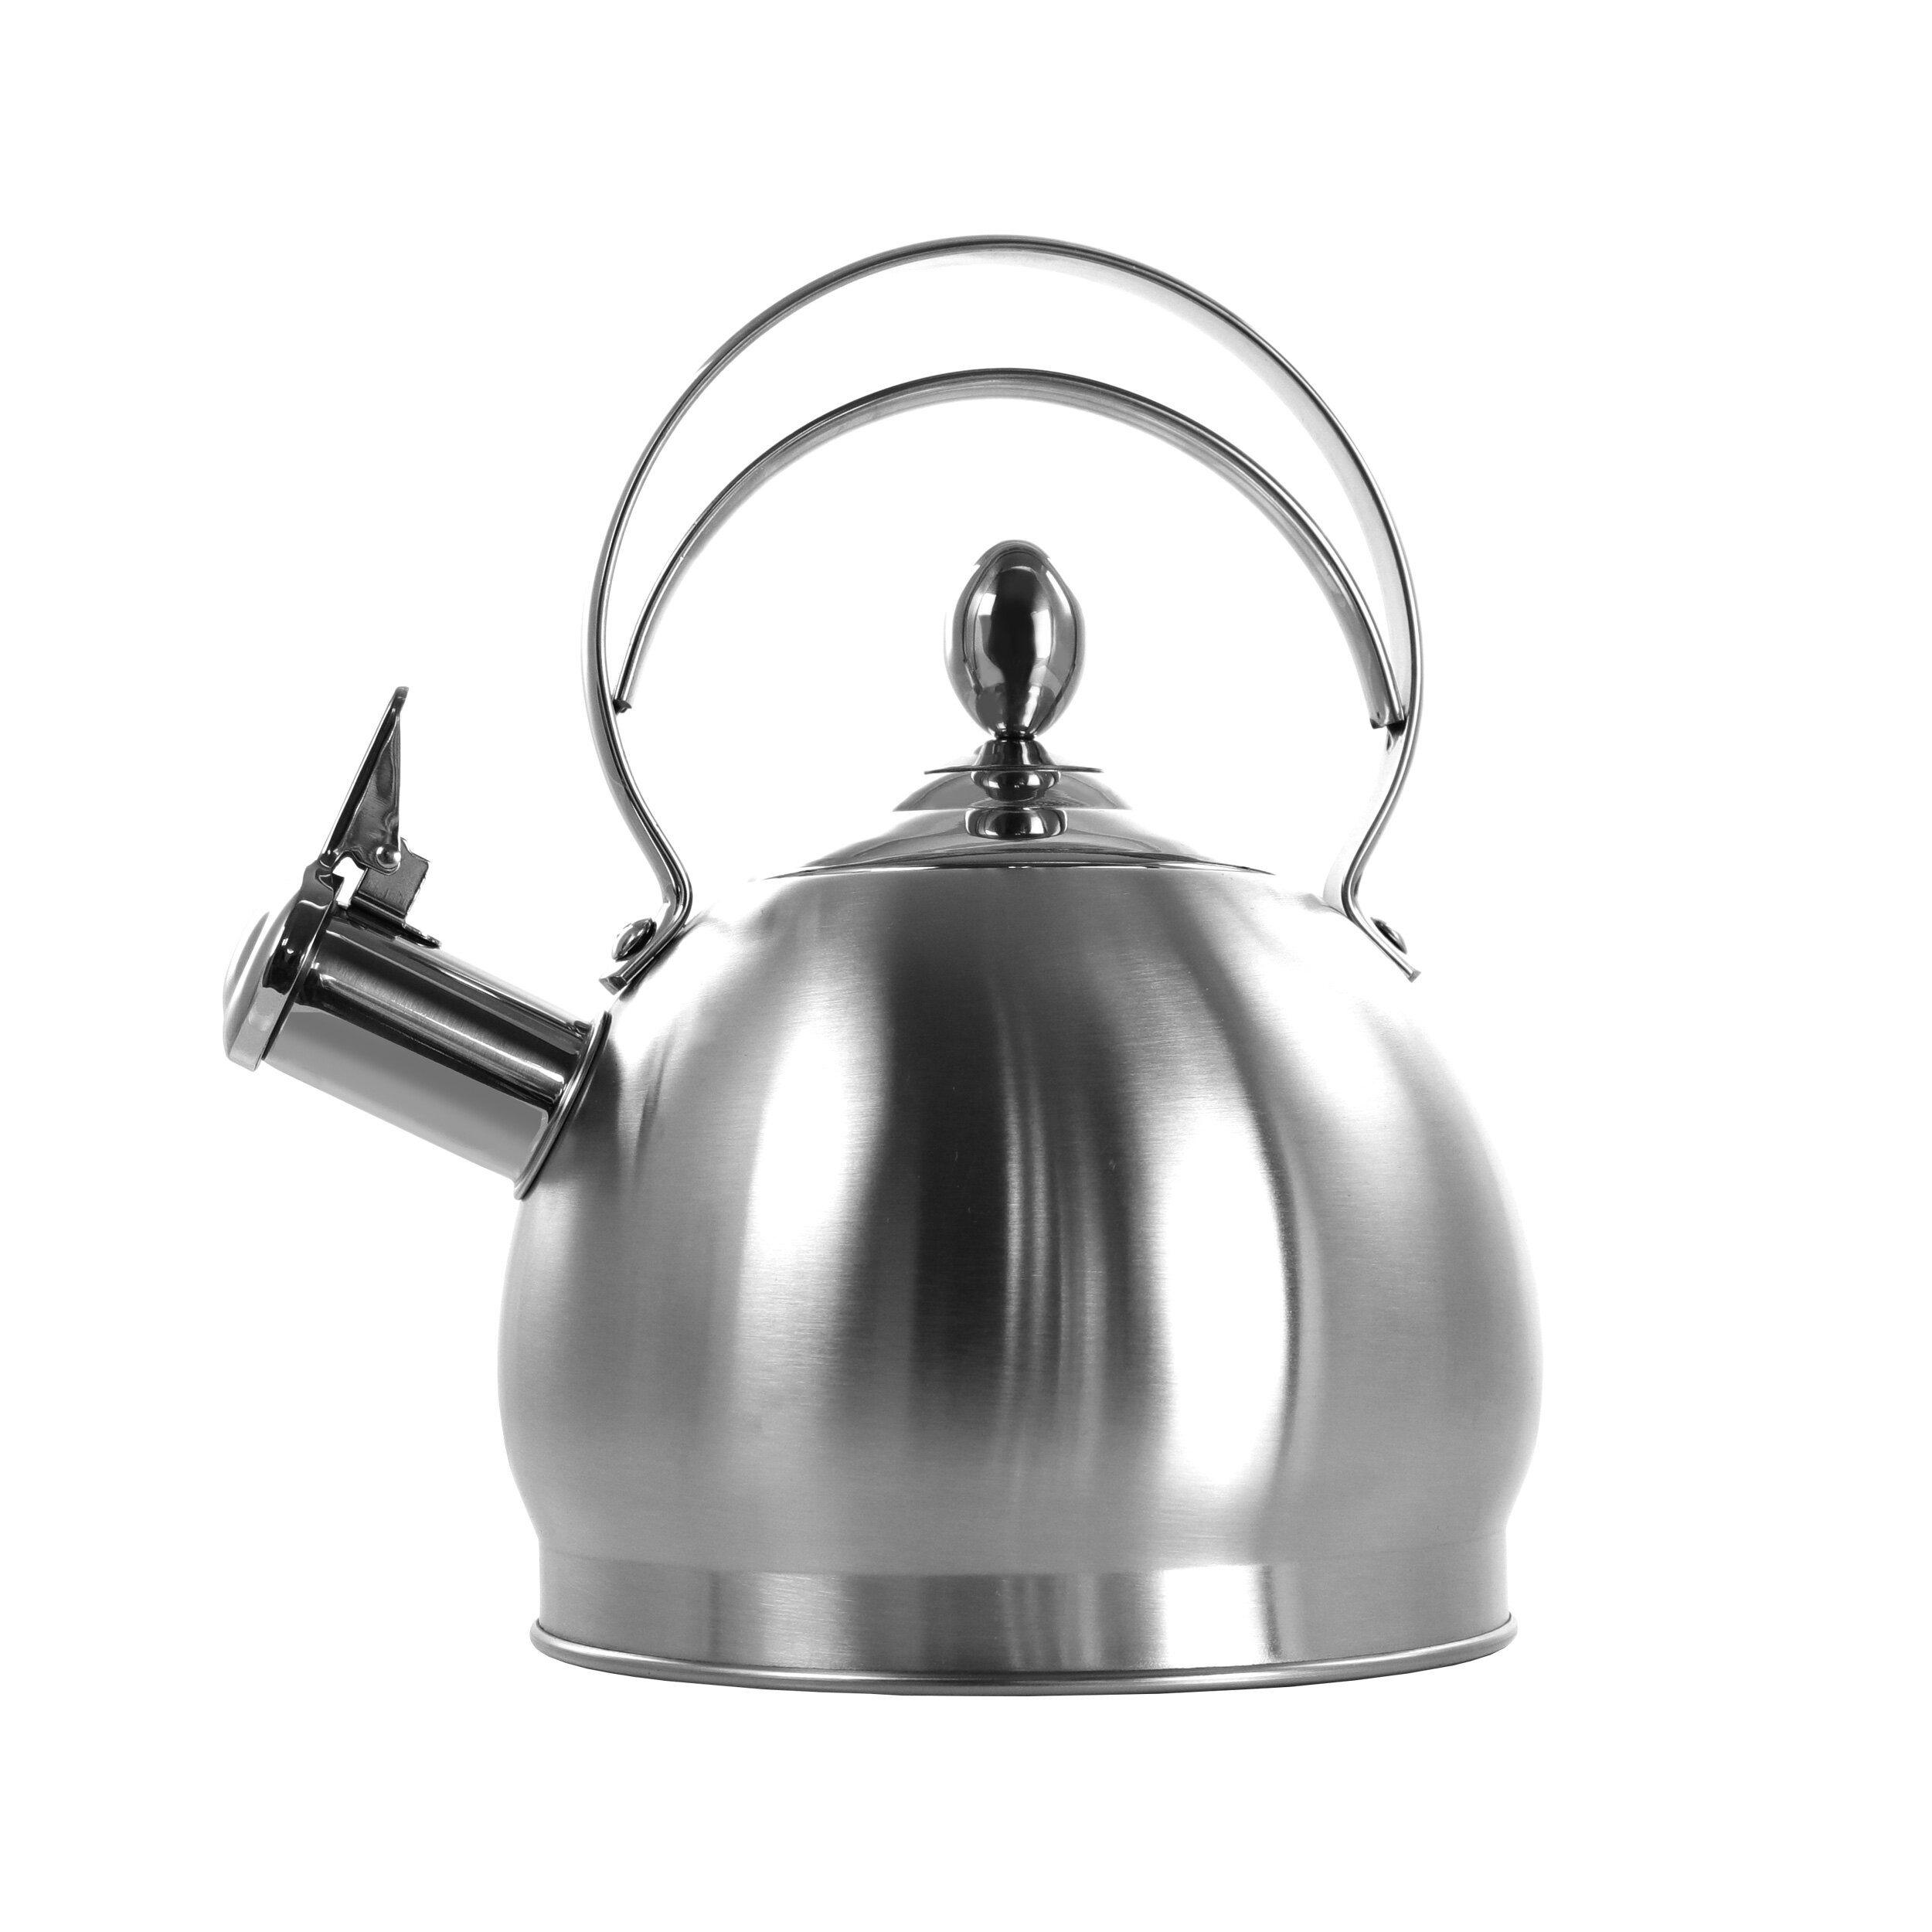 Circulon Enamel on Steel 2-Qt. Whistling Teakettle with Flip-Up Spout - Gray